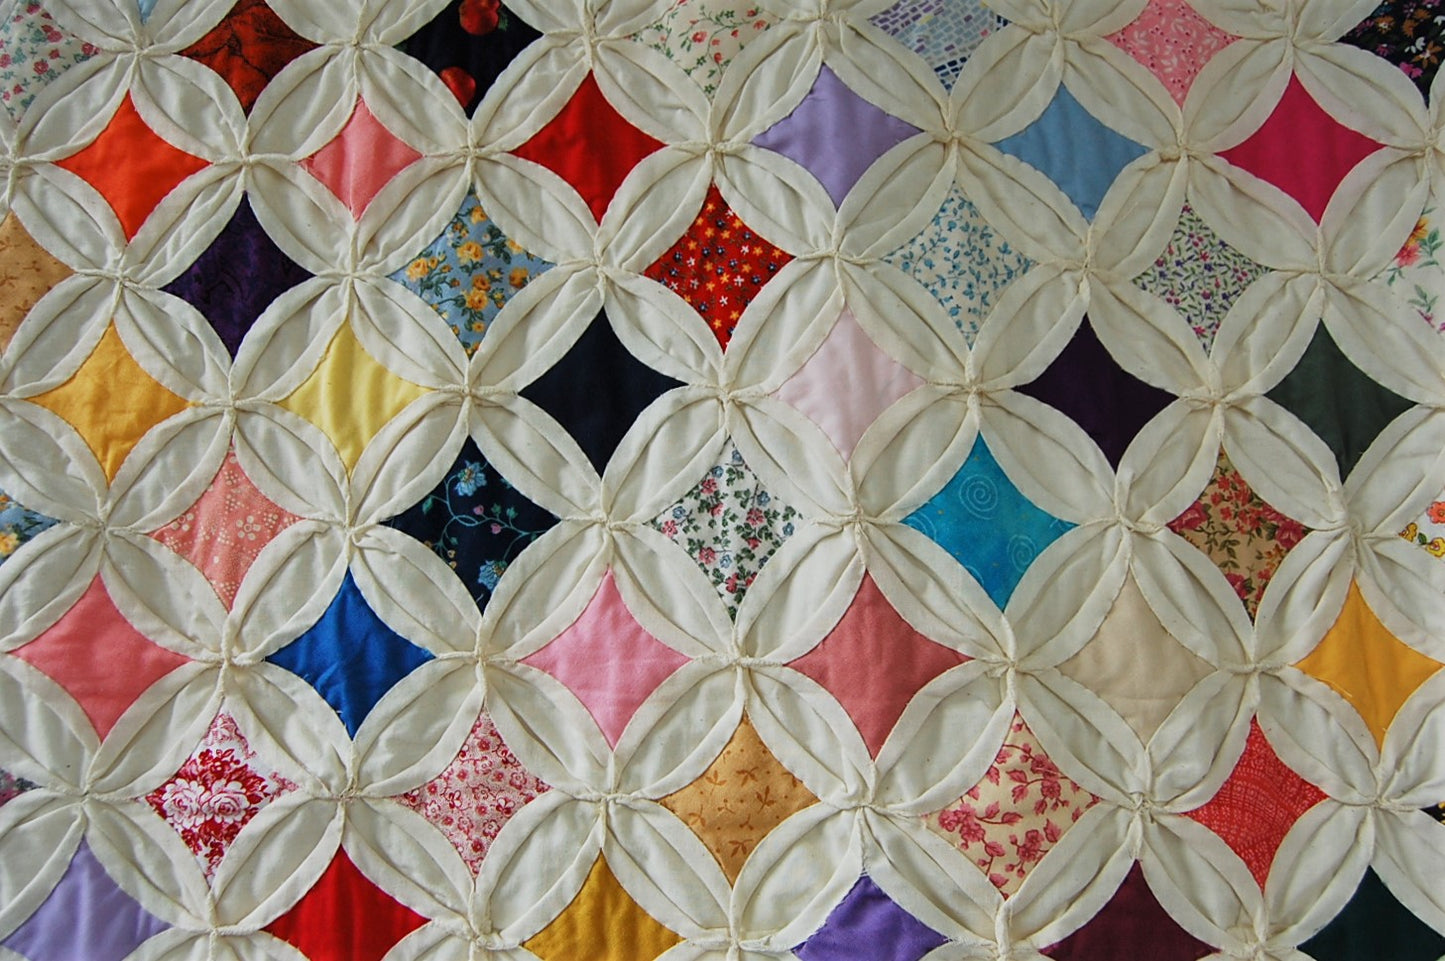 Vintage cathedral windows throw quilt